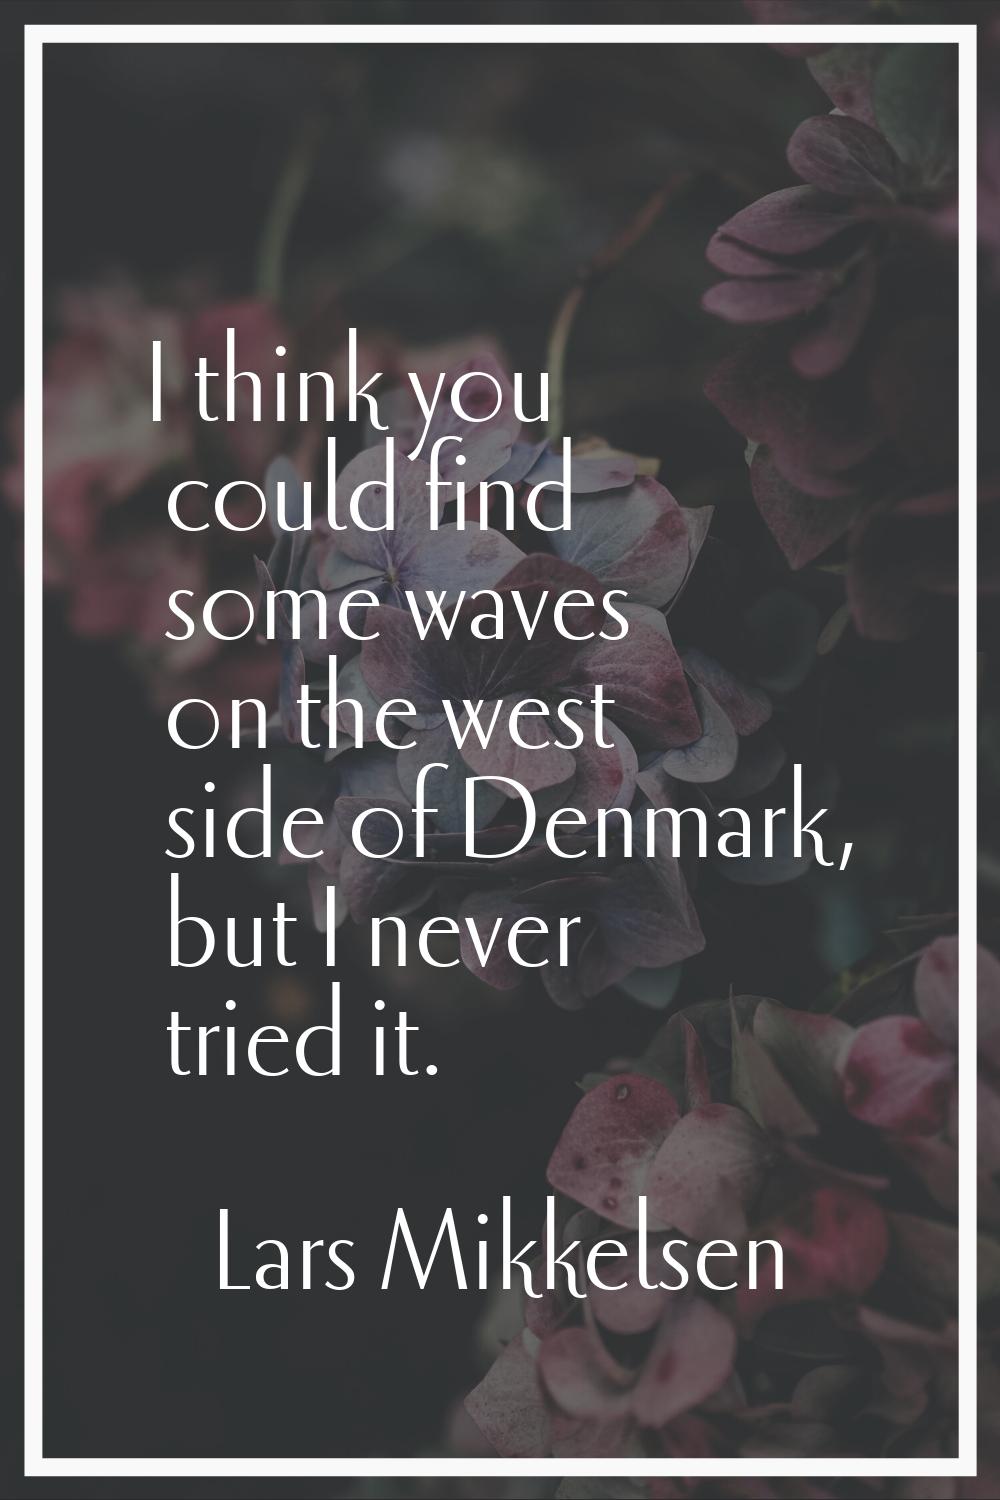 I think you could find some waves on the west side of Denmark, but I never tried it.